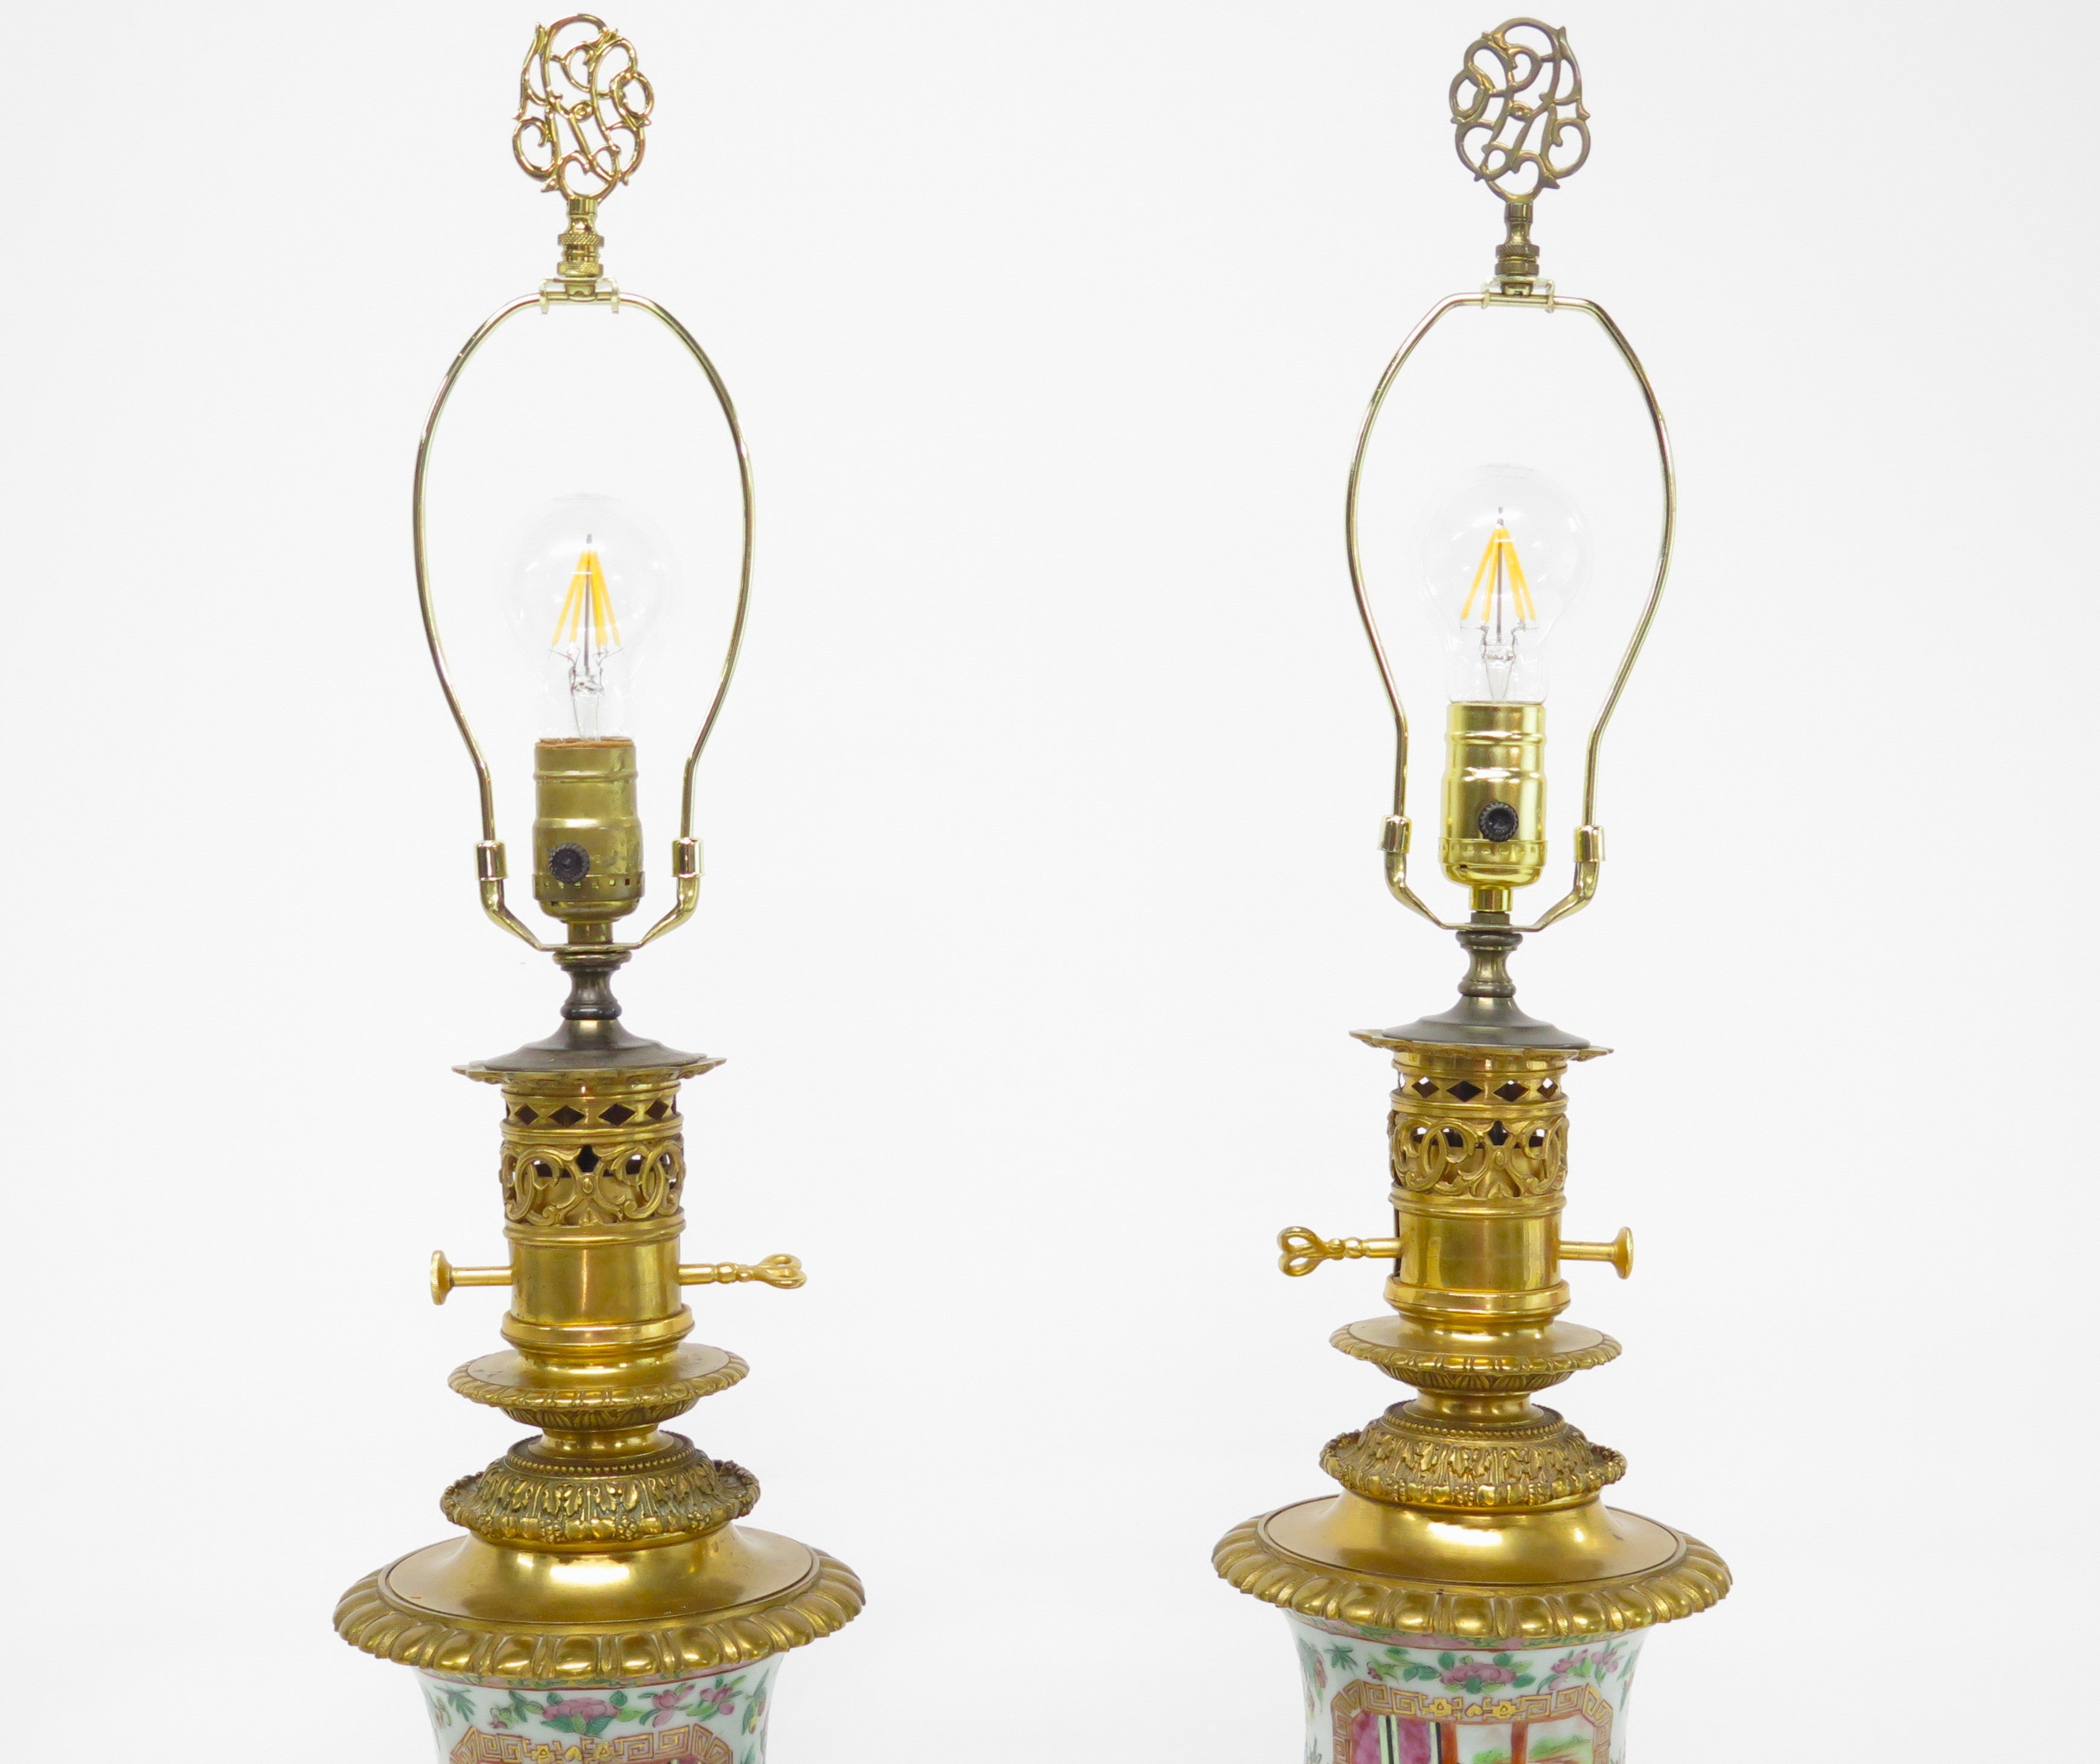 Pair of Chinese Rose Medallion Oil Lamps (Electrified)